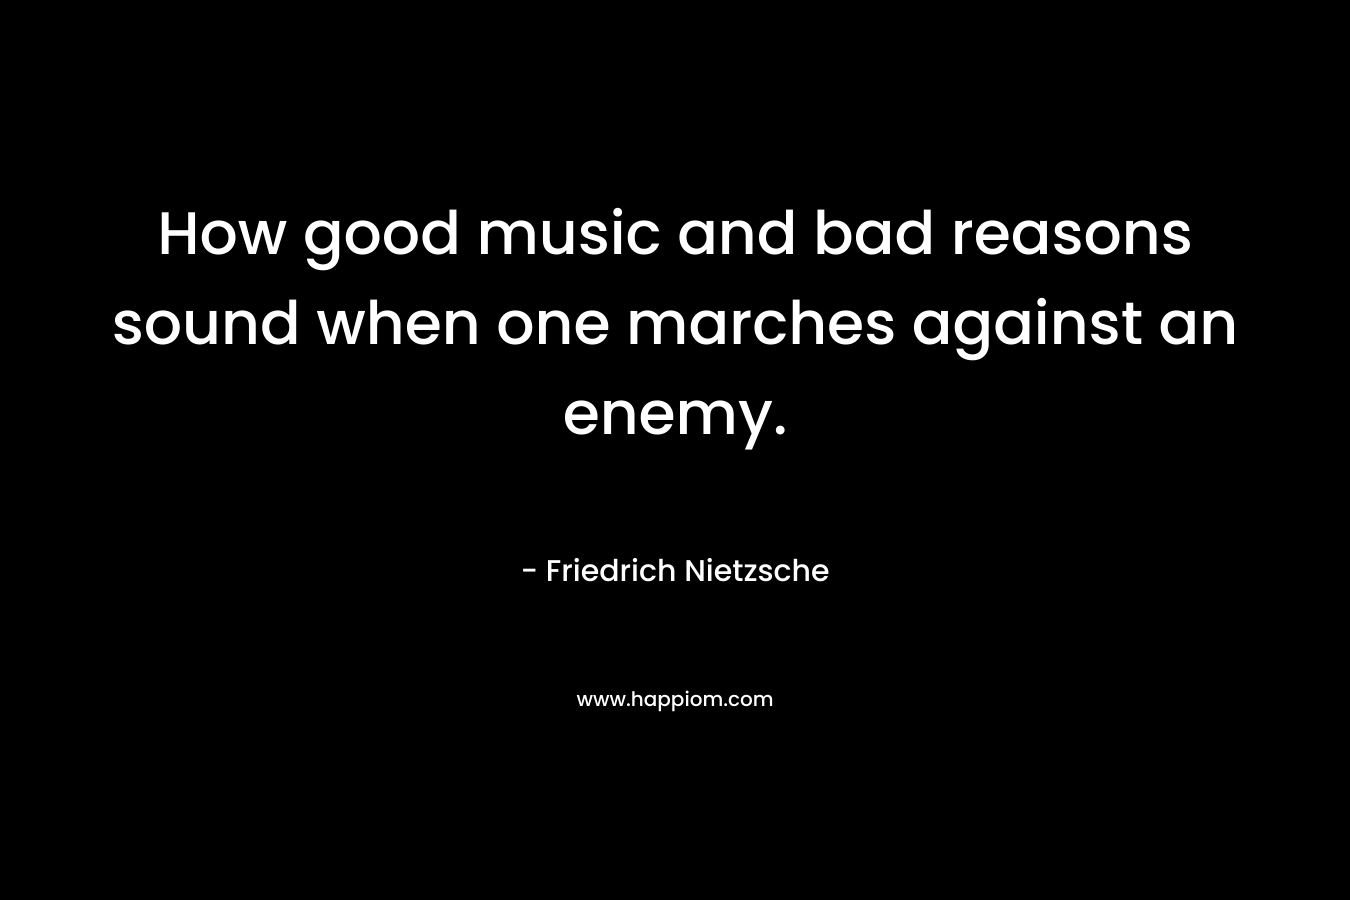 How good music and bad reasons sound when one marches against an enemy.